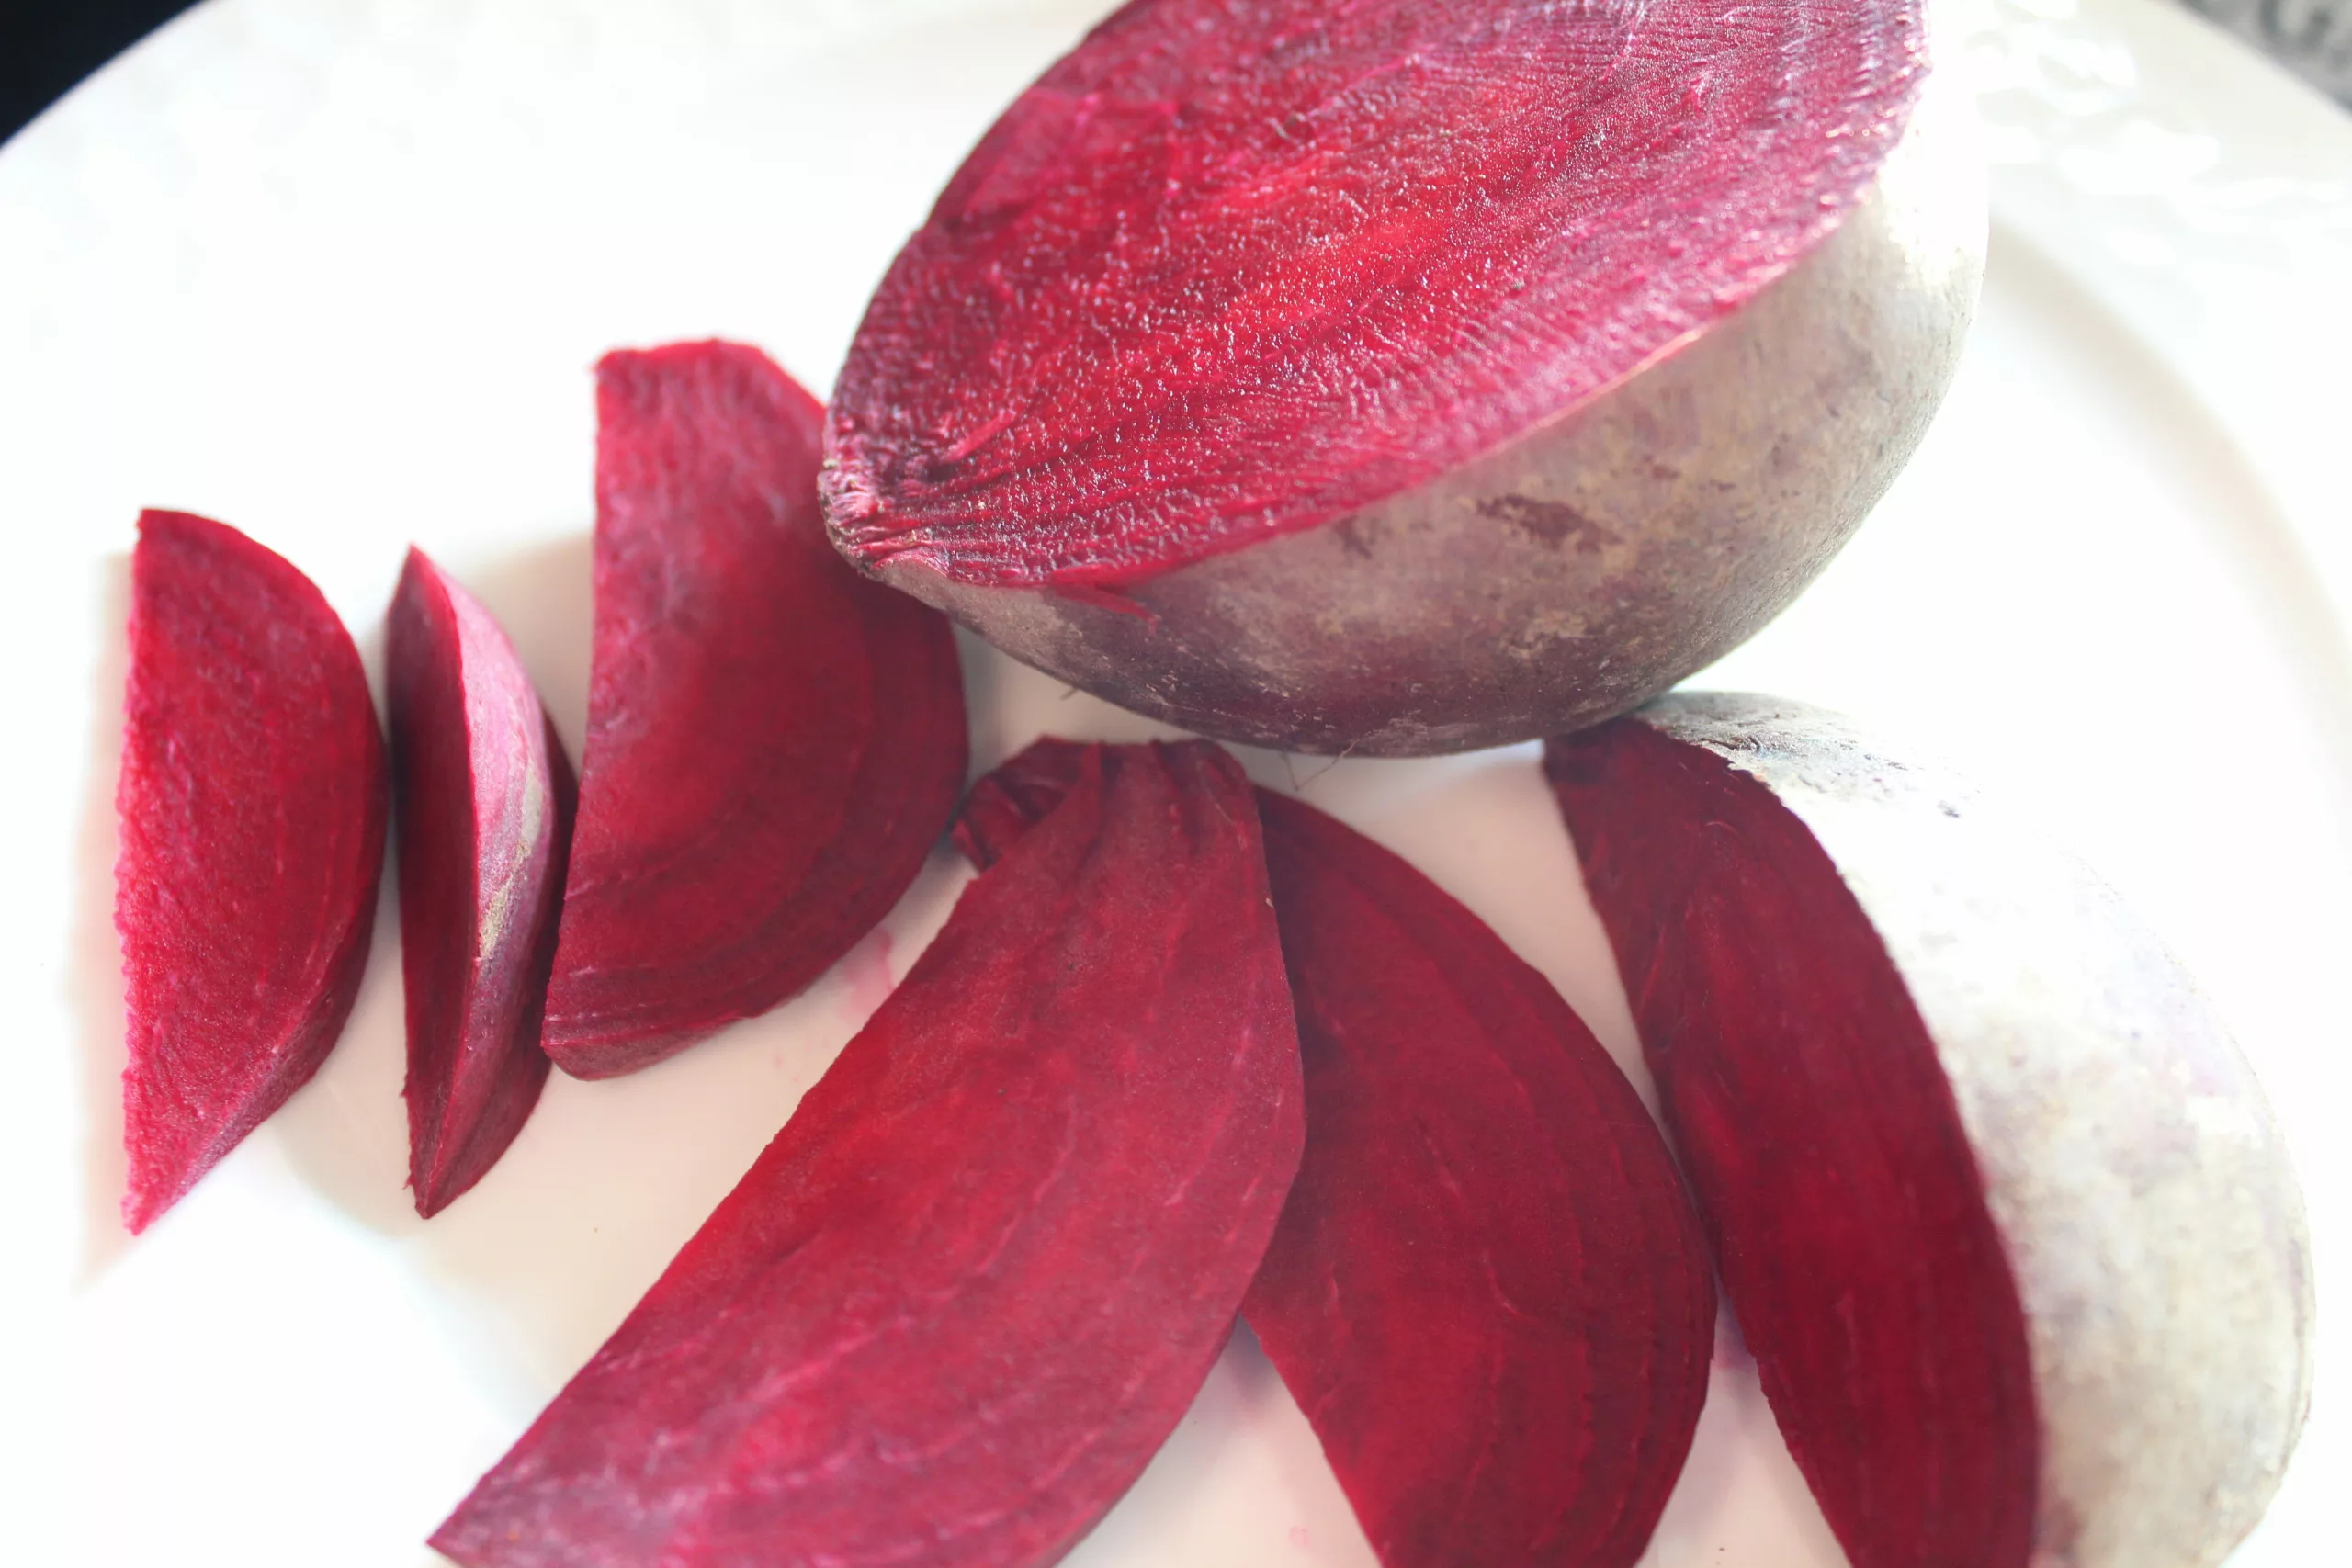 The Secret Superfood: Unleashing the Powerful Benefits of Roasted Beets